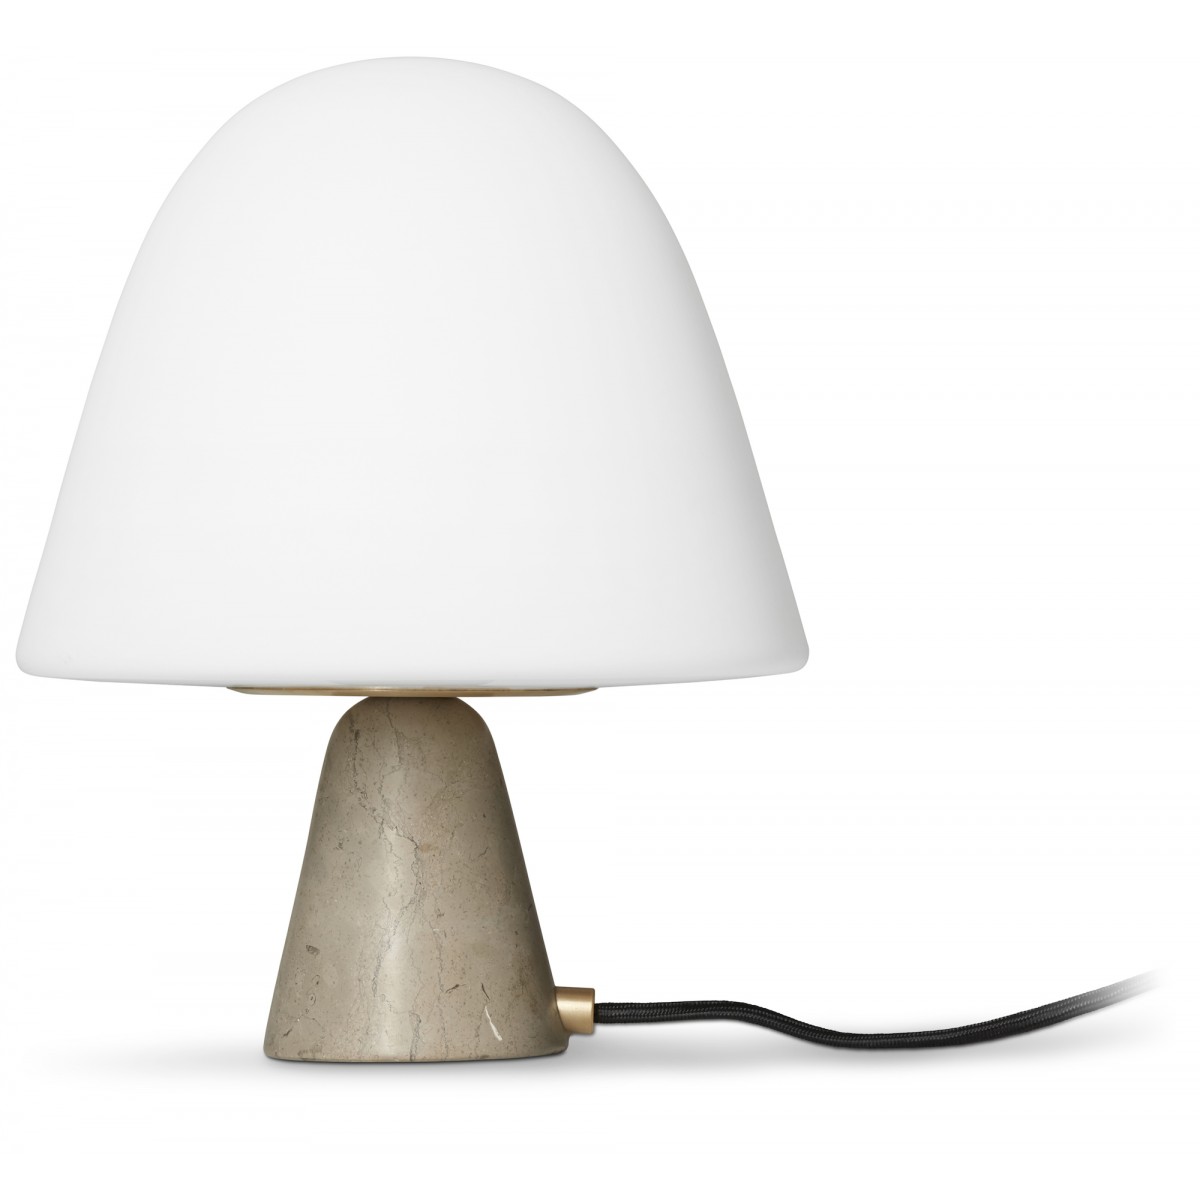 Meadow table lamp